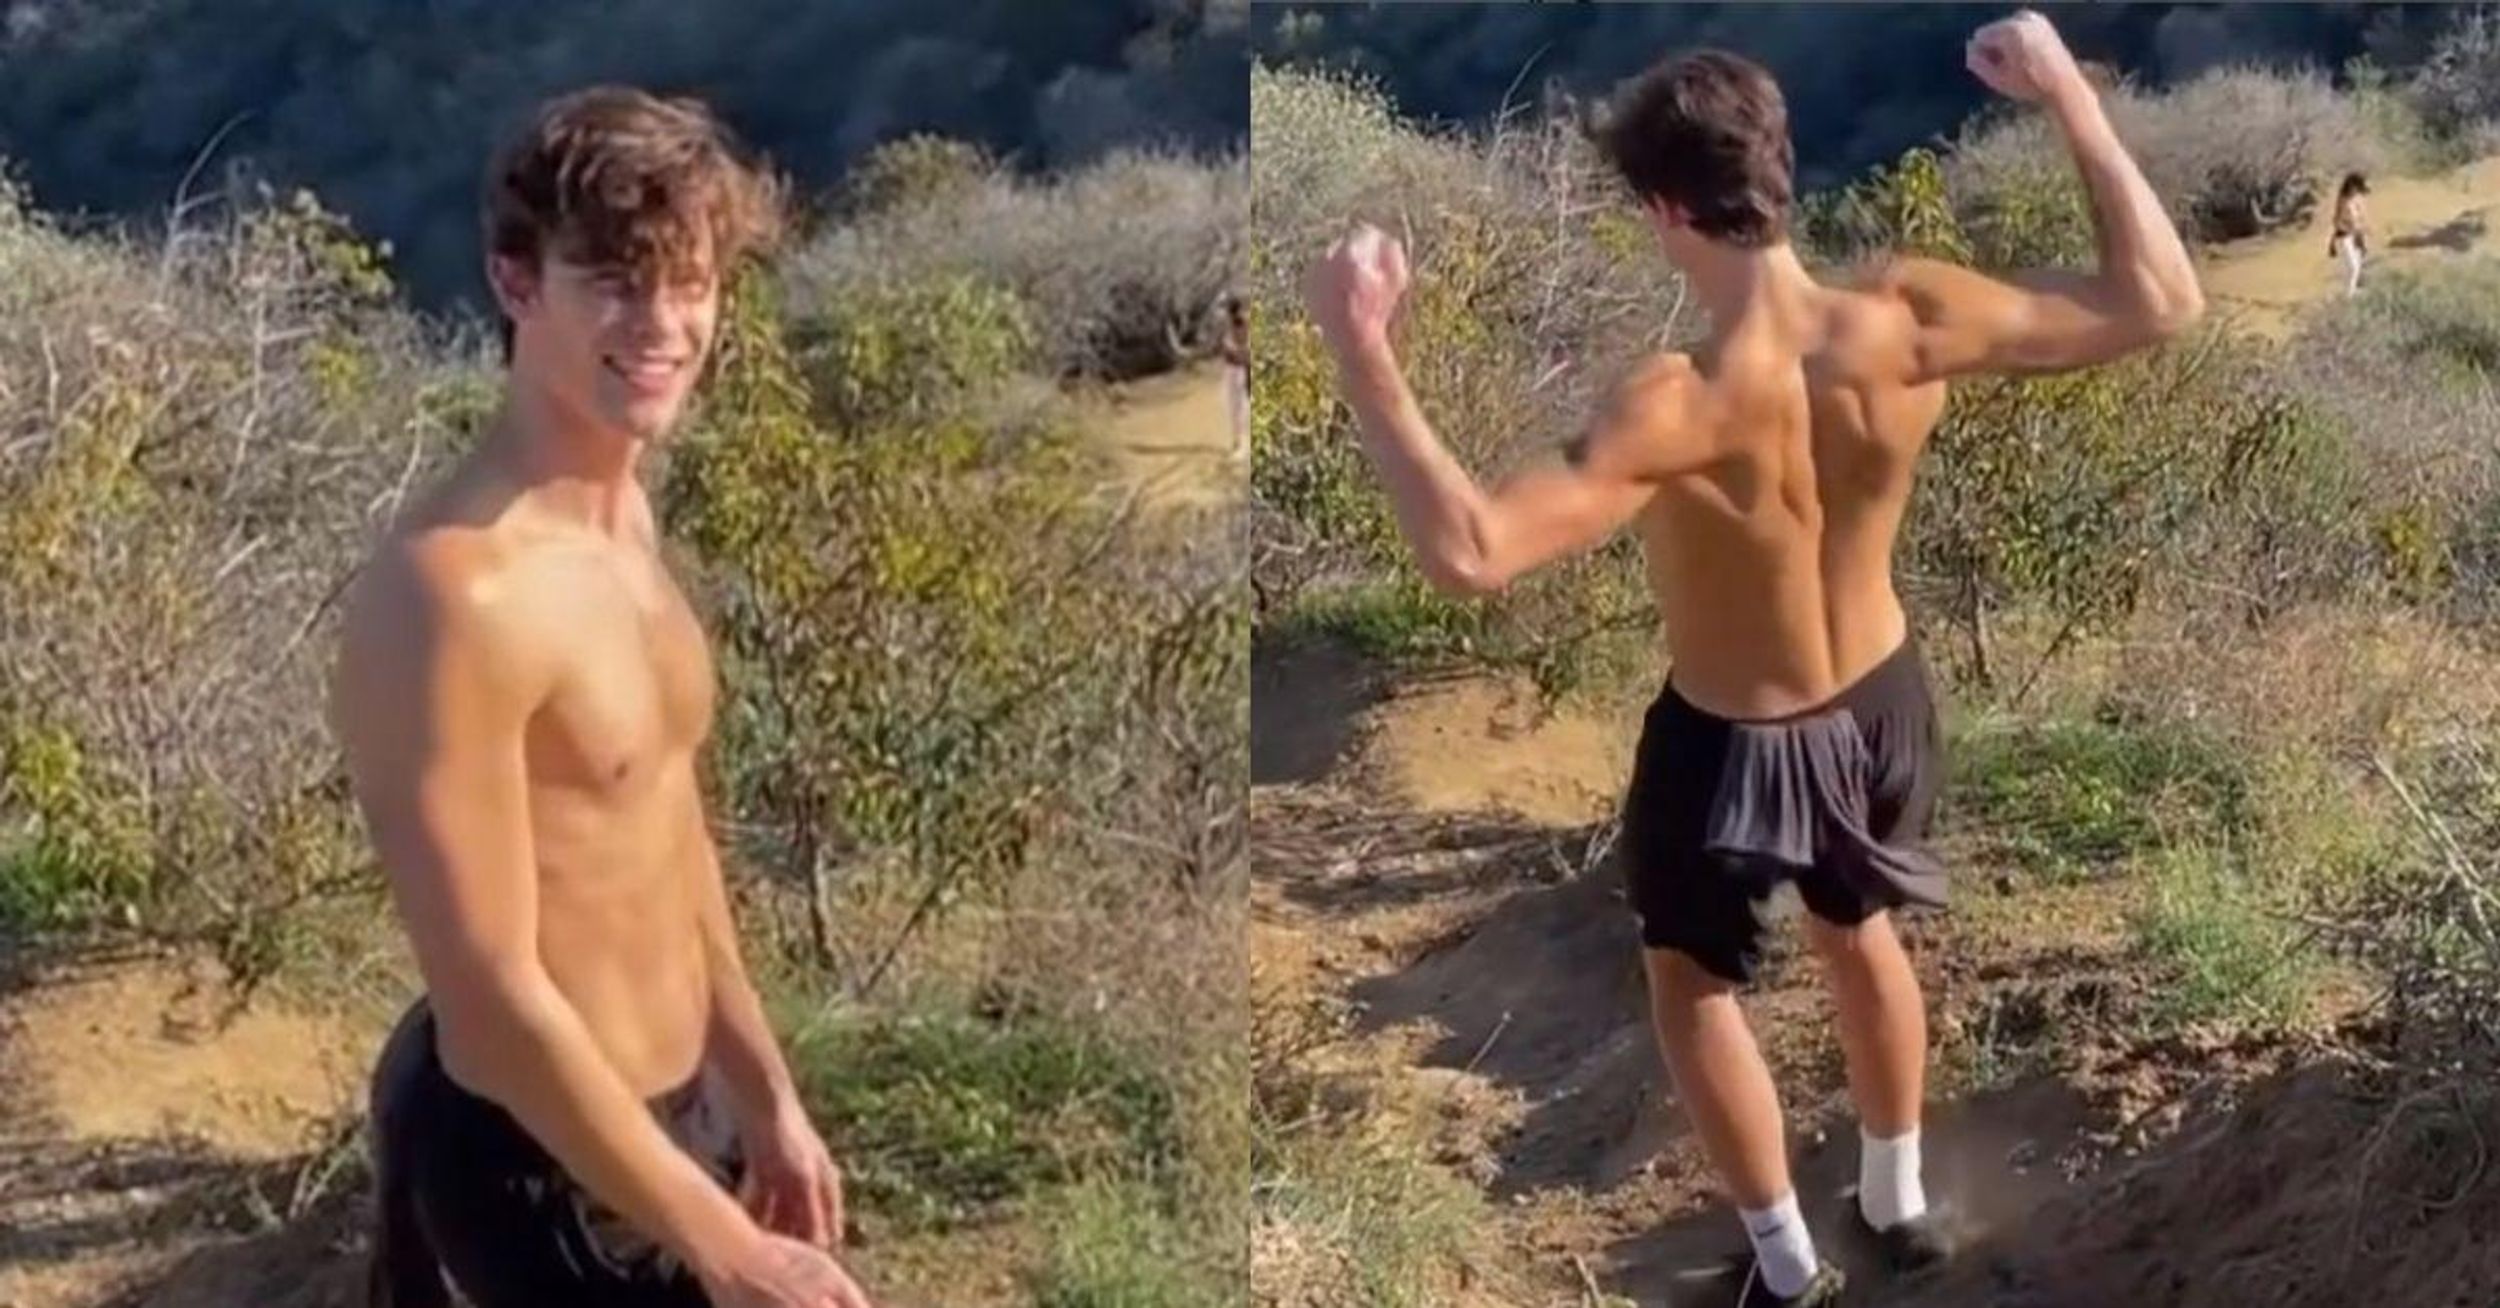 Shawn Mendes Tries To Take A Shirtless Thirst Trap Photo—And Ends Up Slipping Down A Hill